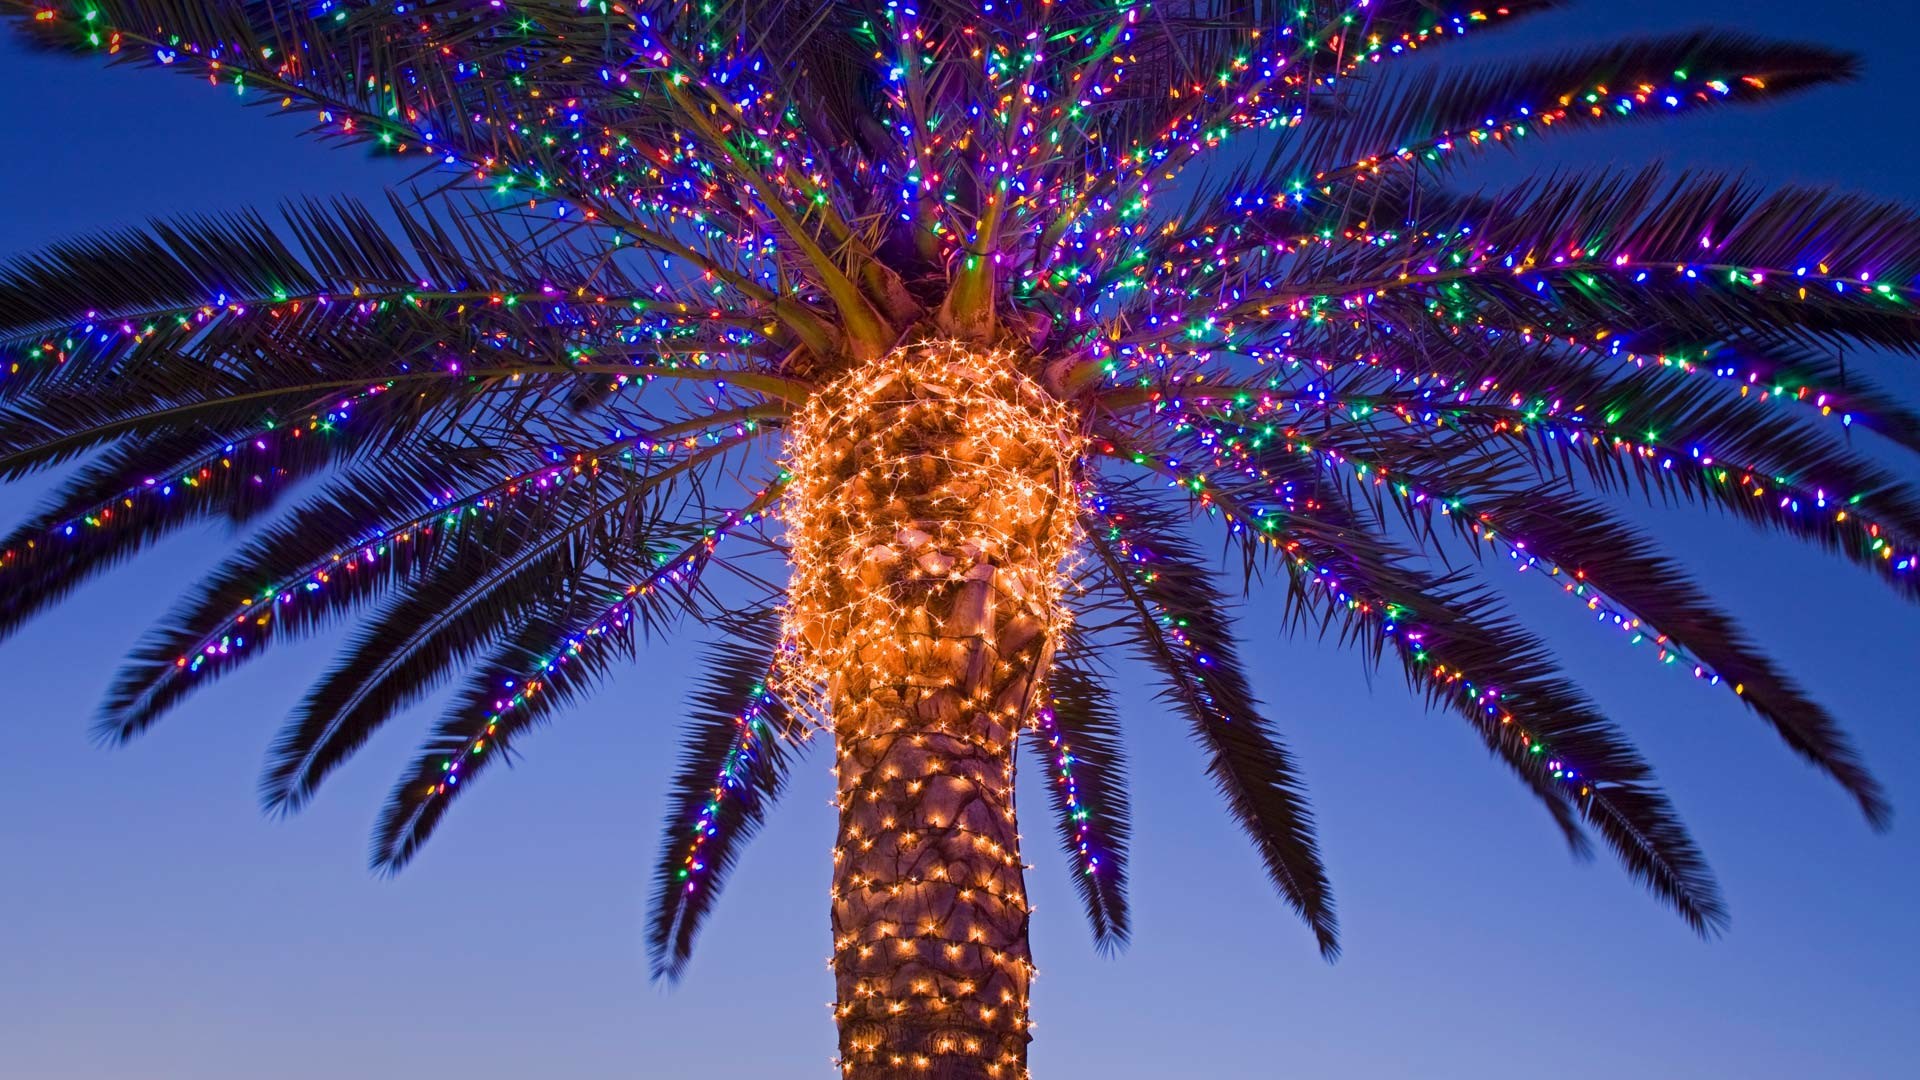 1920x1080 Bing Image Archive: Christmas lights on a palm tree at a winery, Temecula  Valley, California (Â© Richard Cummins/Corbis)(Bing United States)